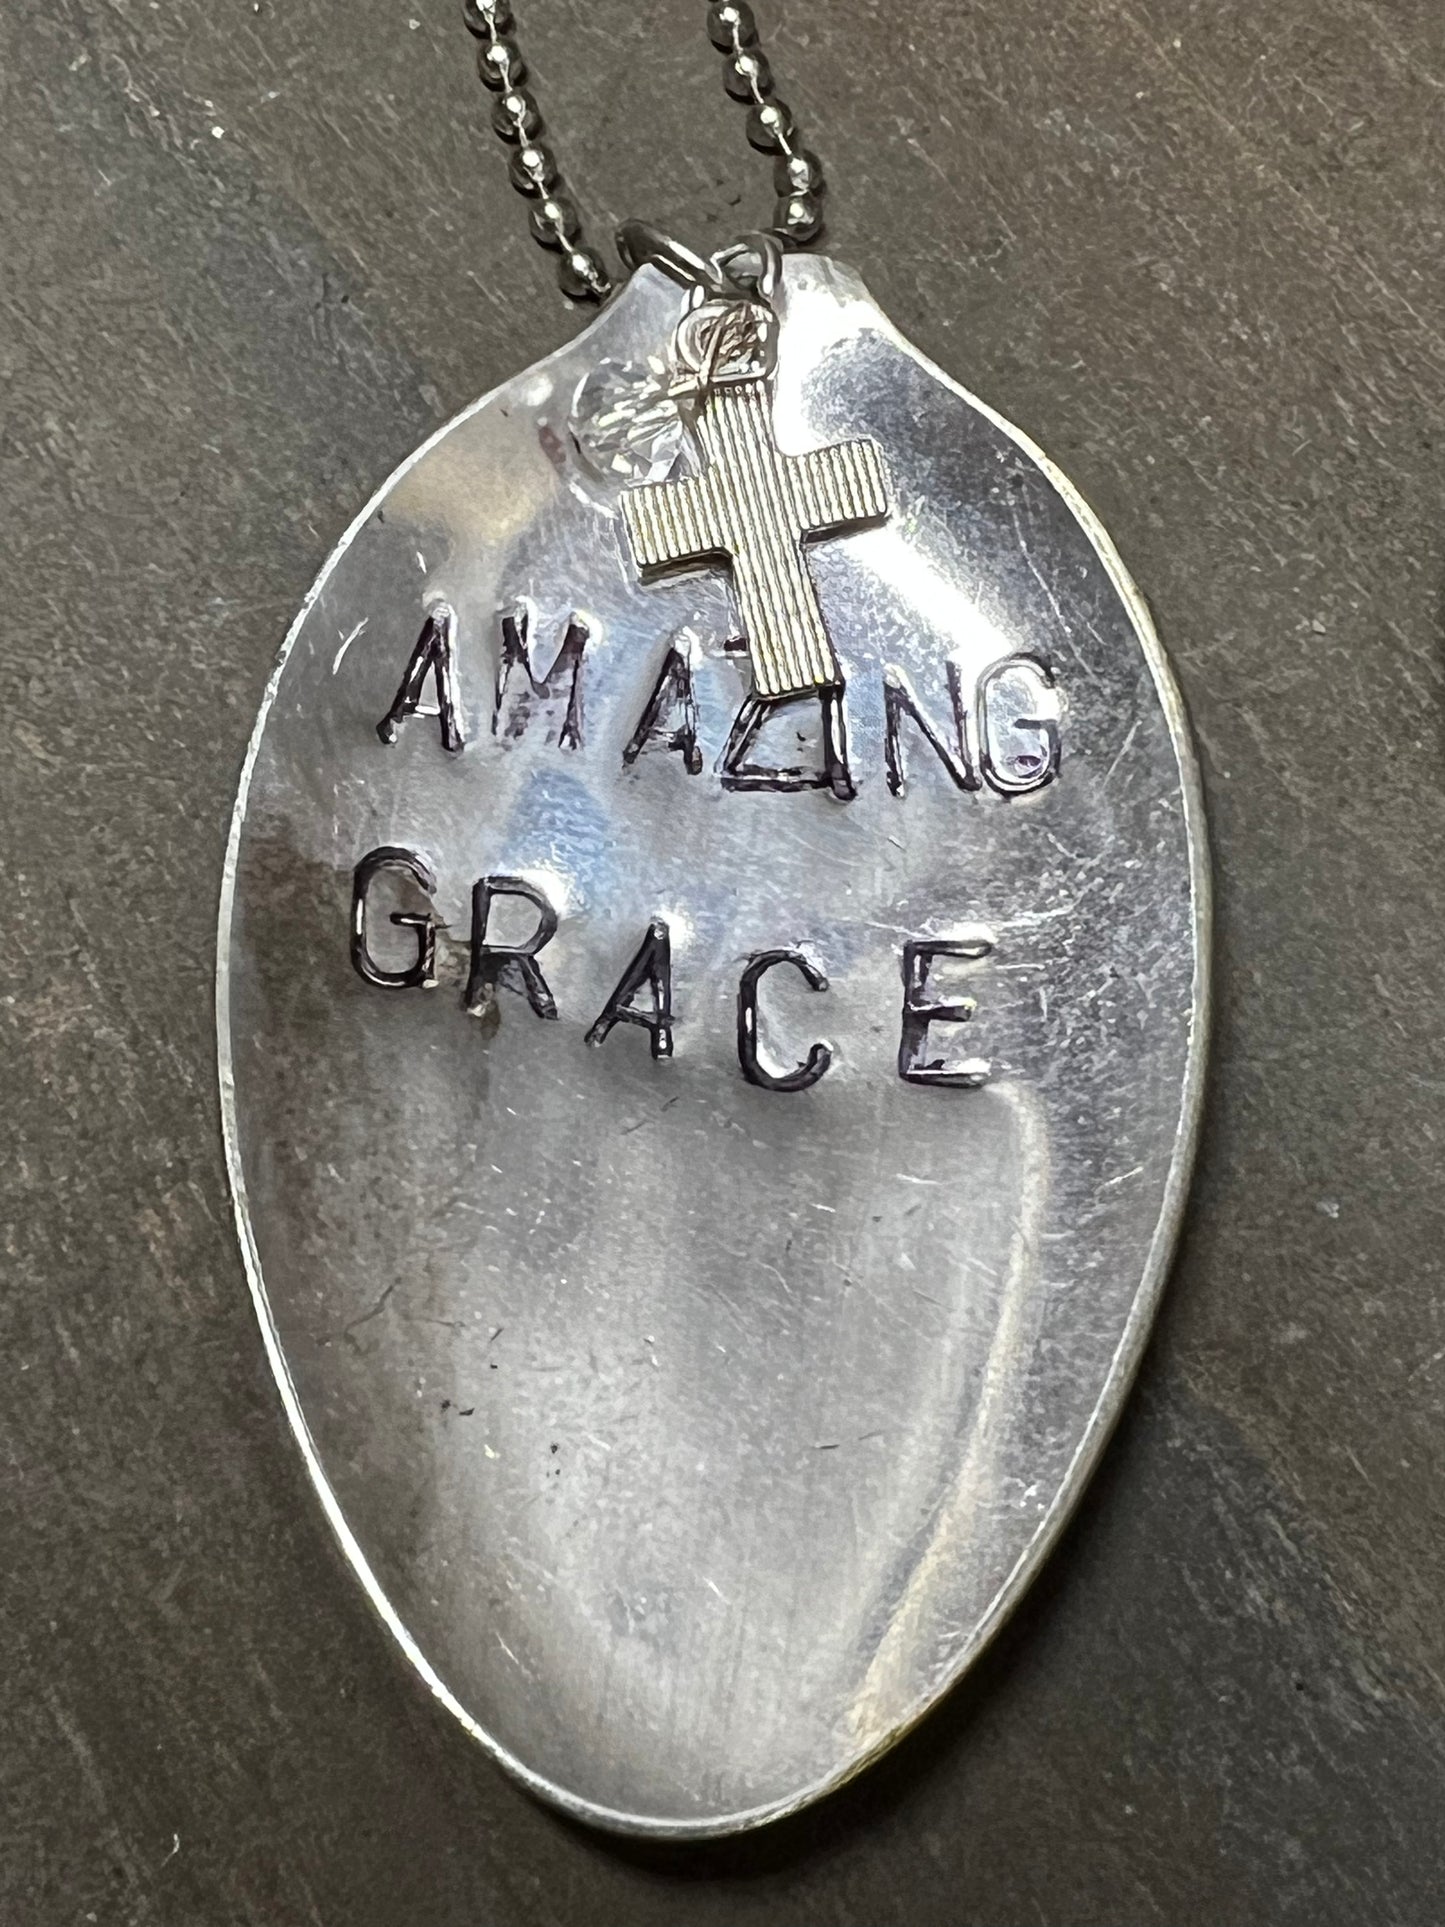 Necklace, Ball Chain W/Charms, AMAZING GRACE